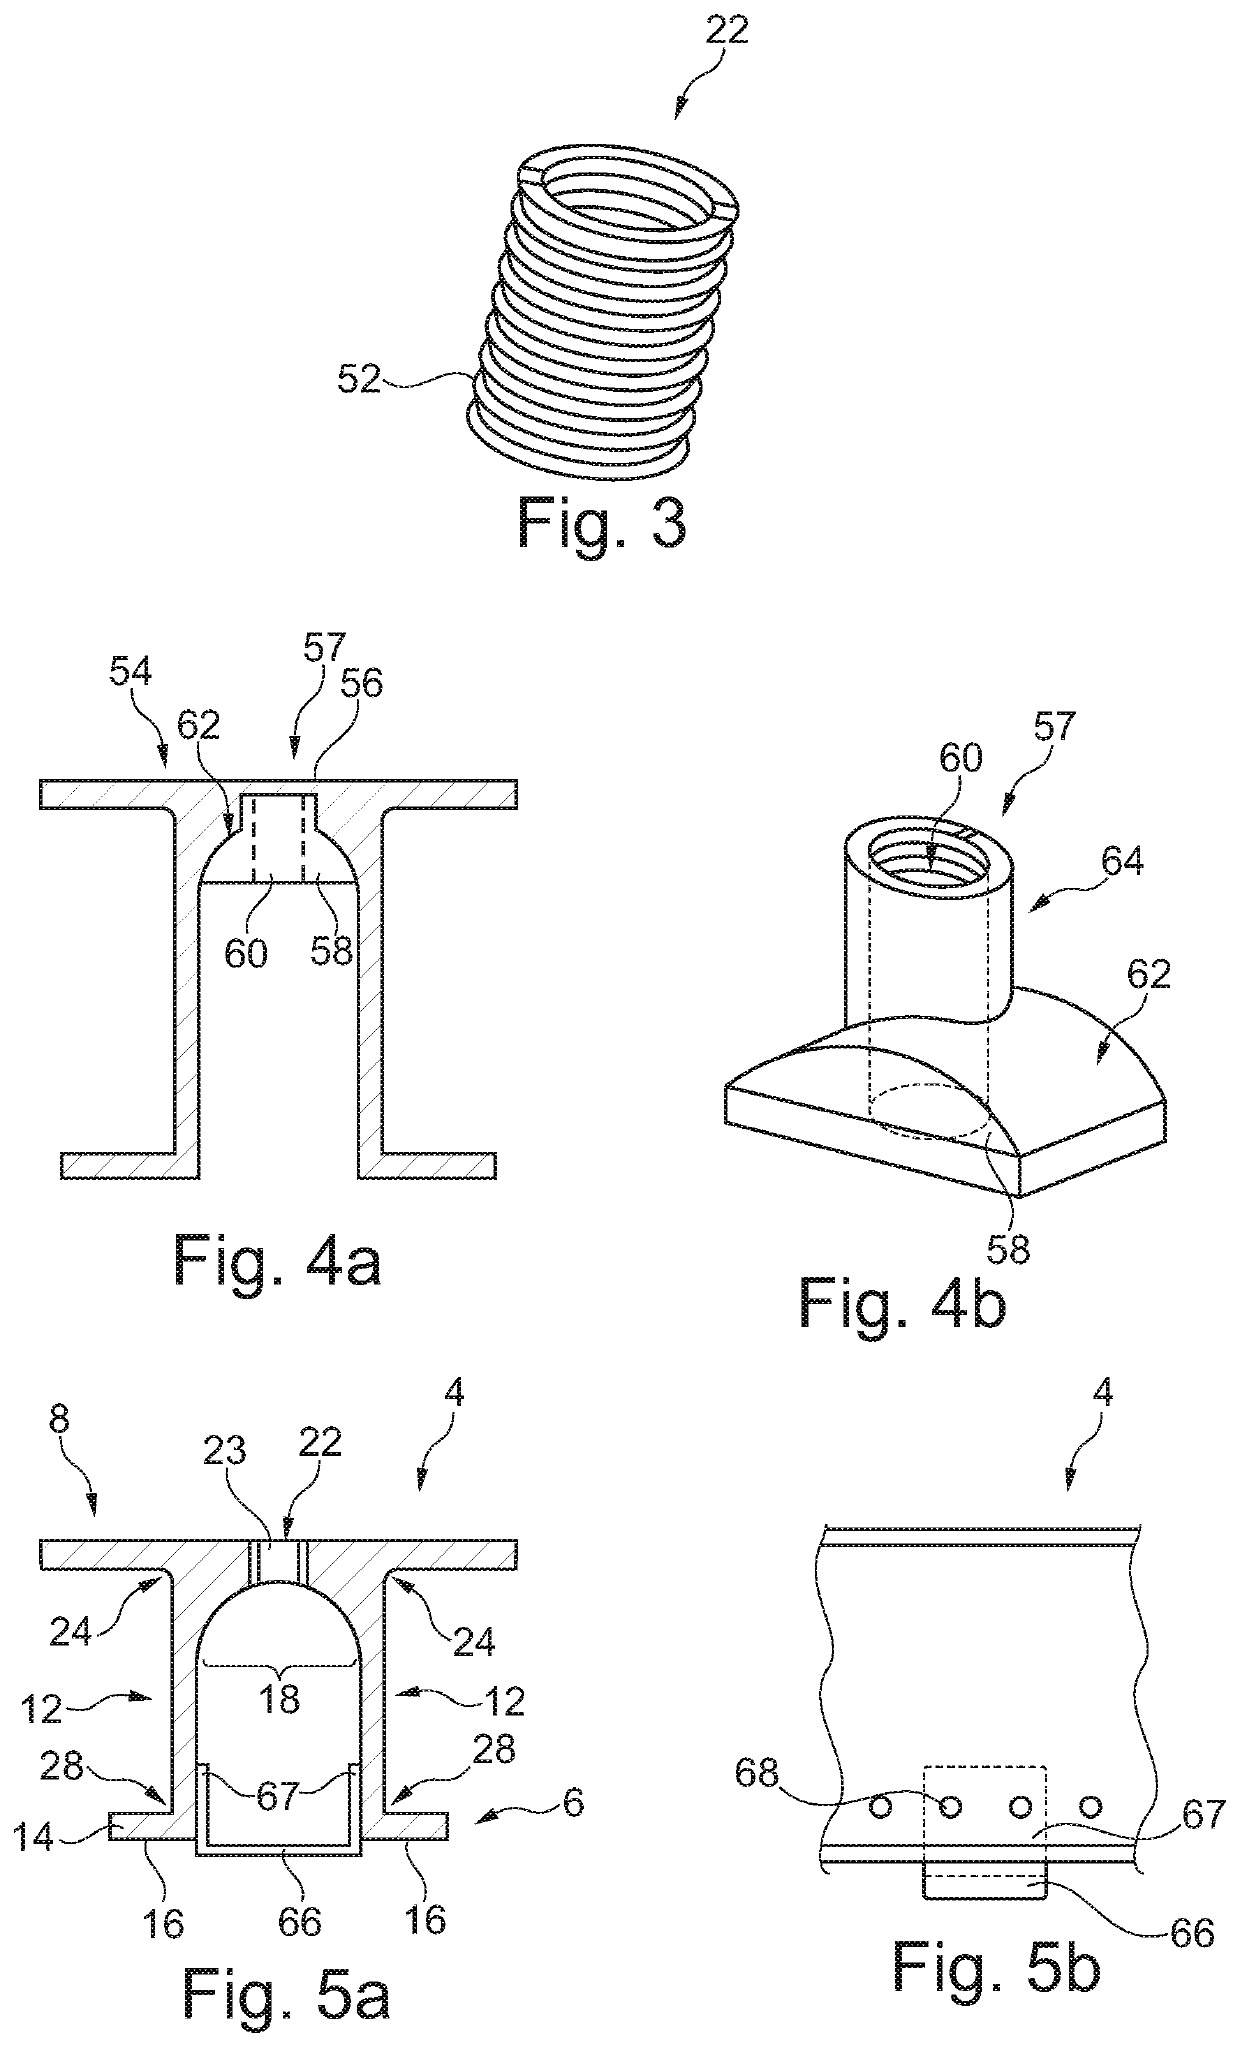 Rail Systems for Fixing Fittings in a Cabin of a Vehicle